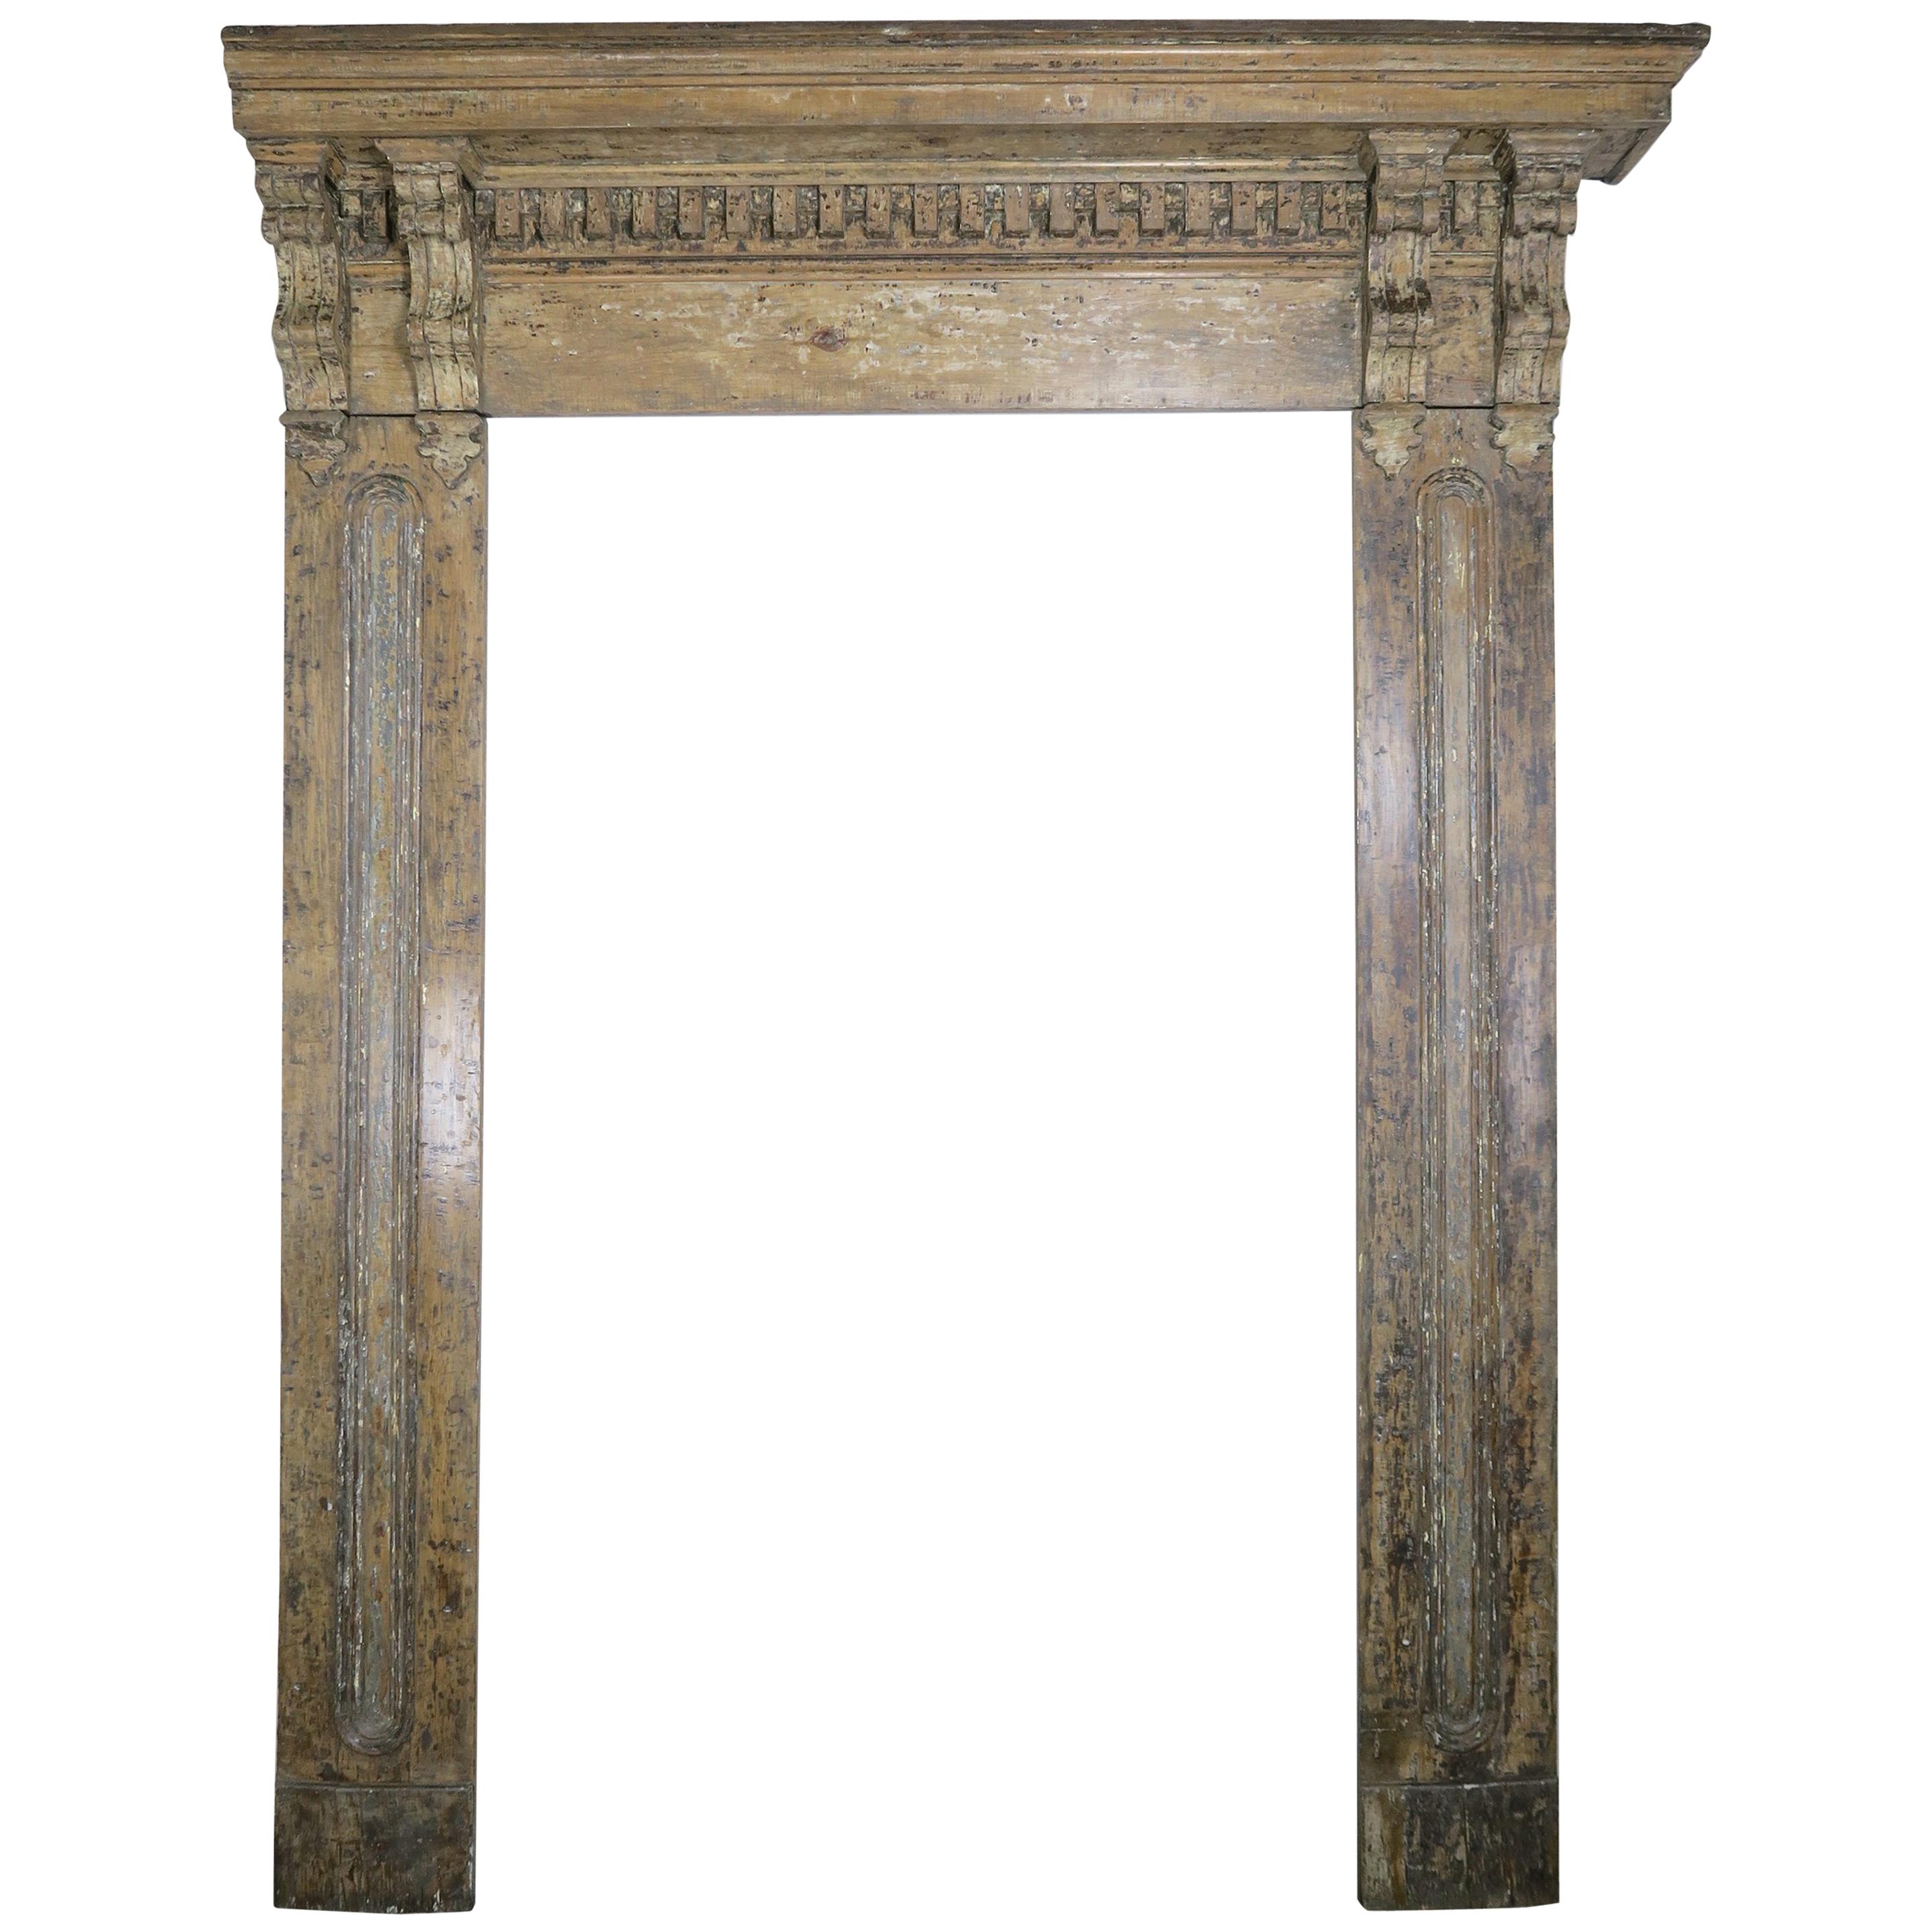 19th Century French Painted Door Surround